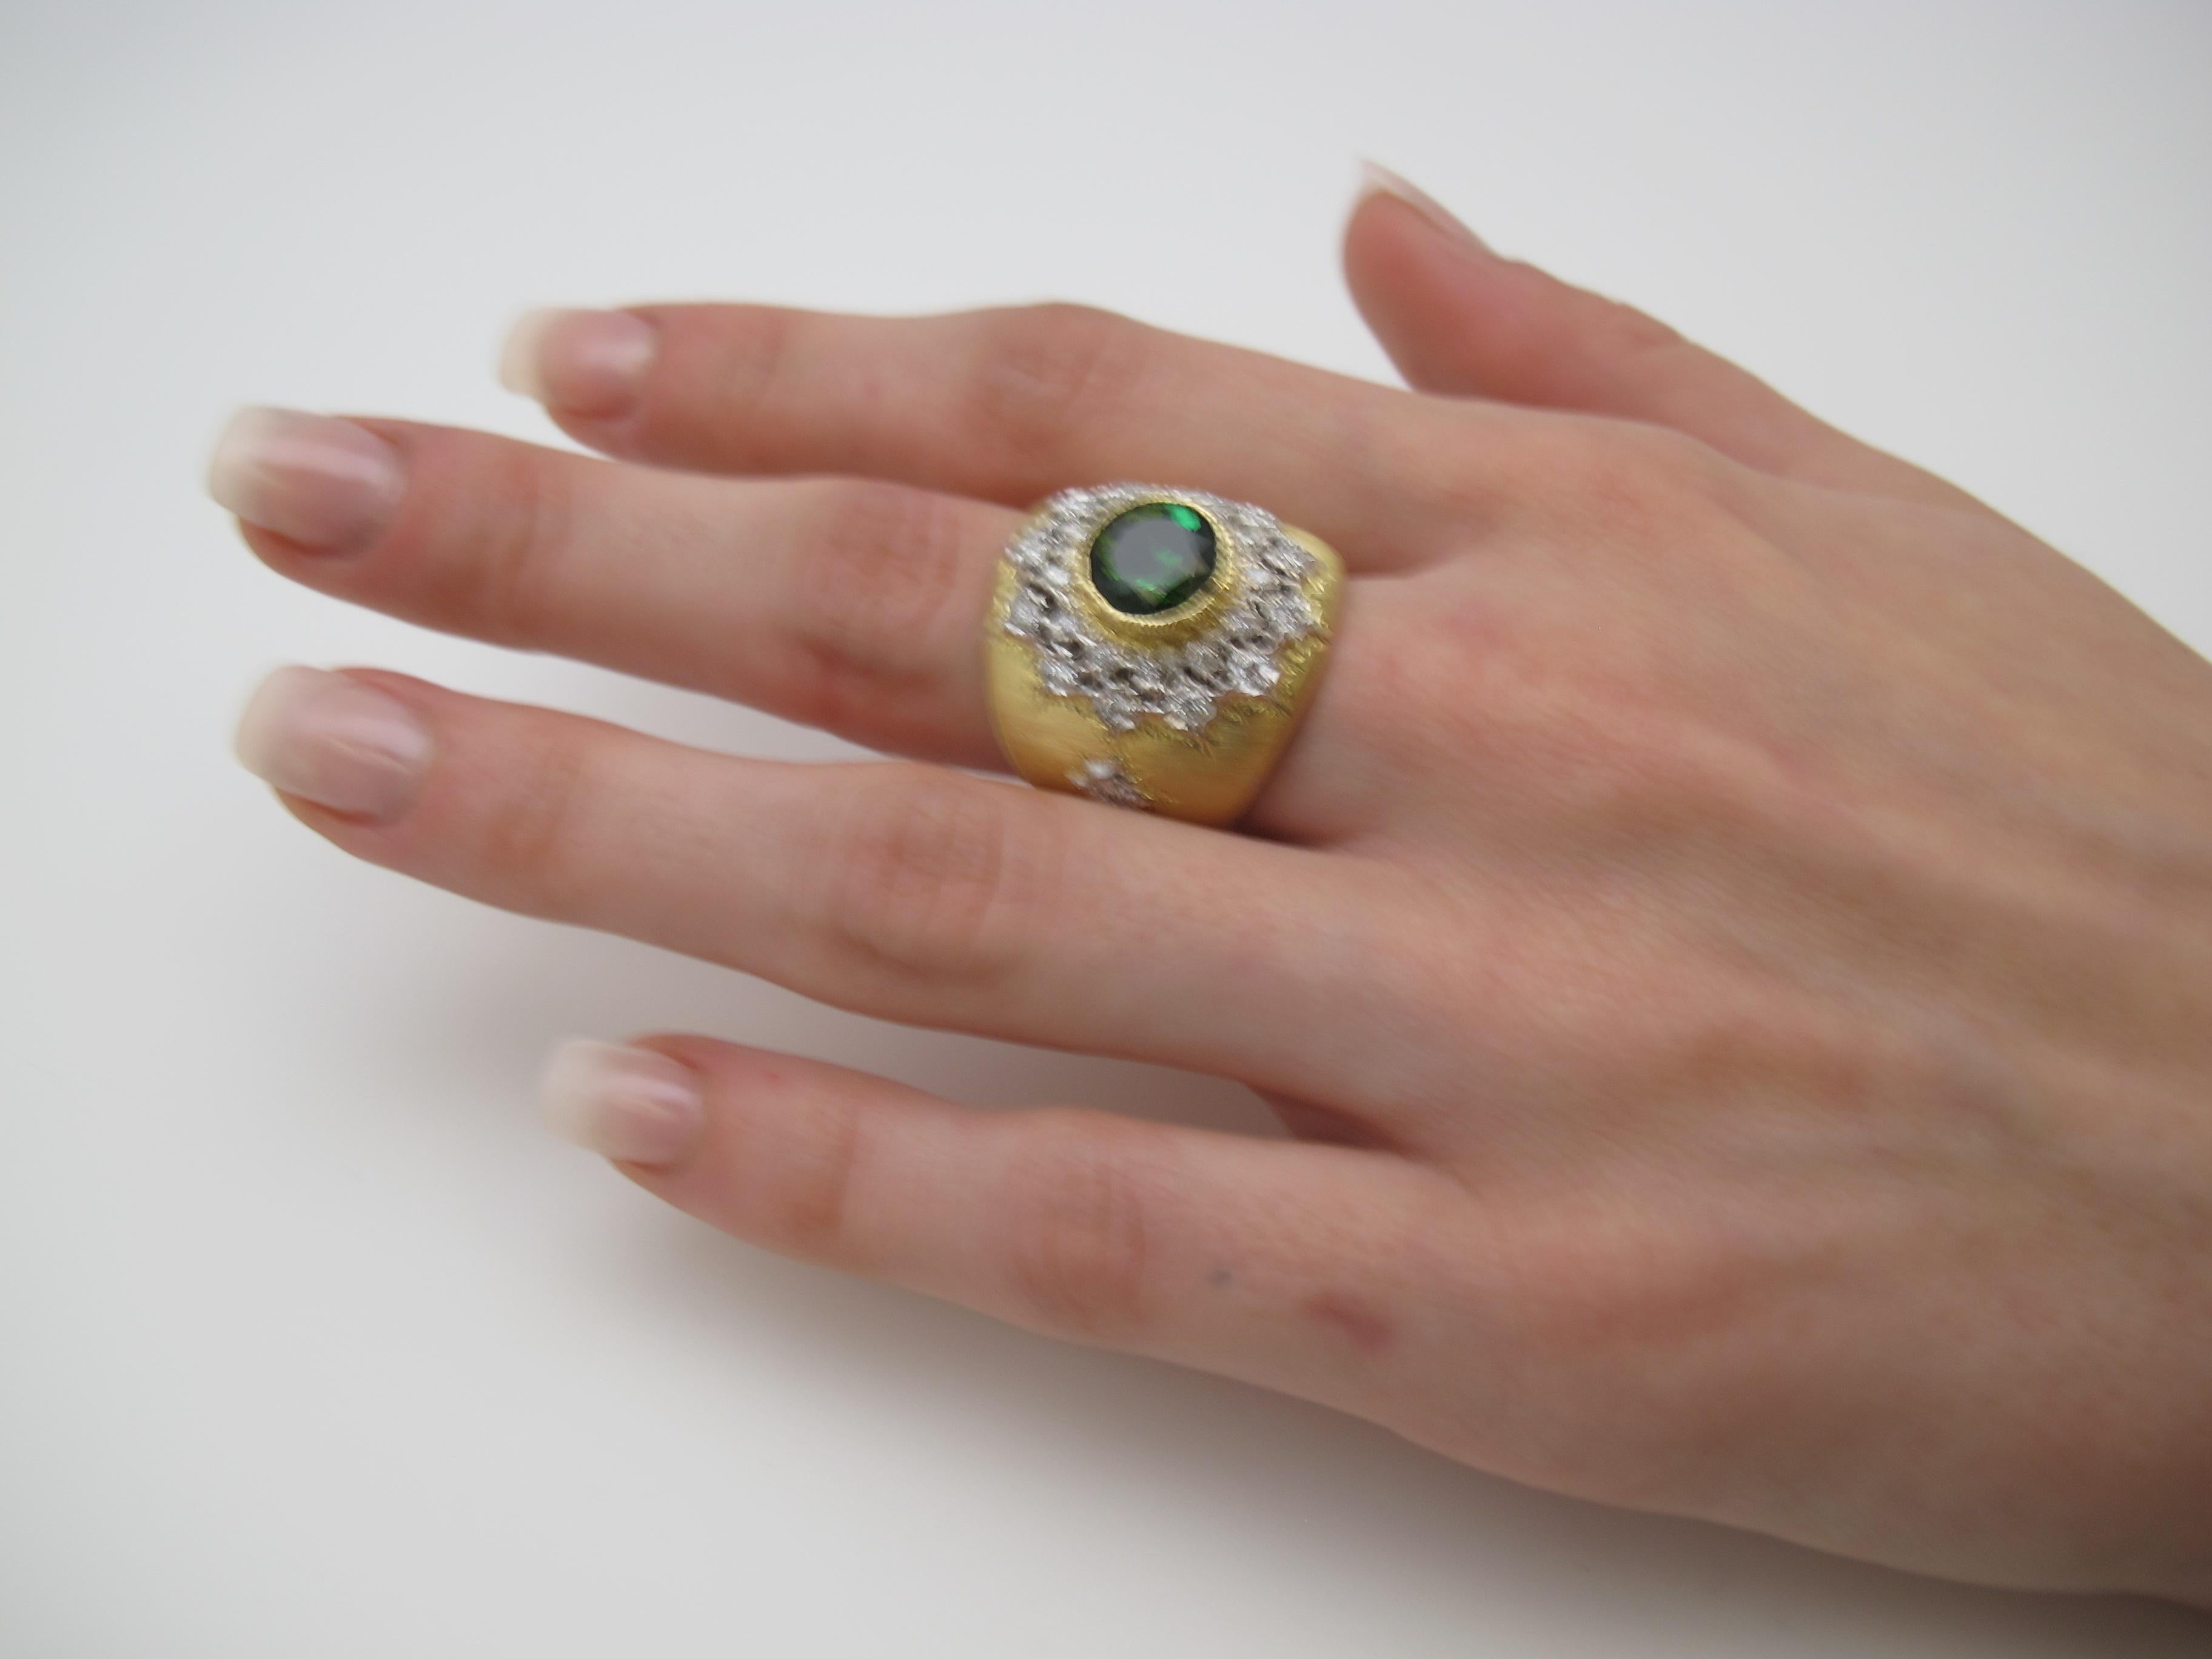 This luxurious Florentine style ring features a 2.75 carat, bright, bluish green tourmaline set in an elaborate 18k yellow gold bezel, surrounded by a nearly a carat of brilliant white diamonds. The diamonds have been individually set in a